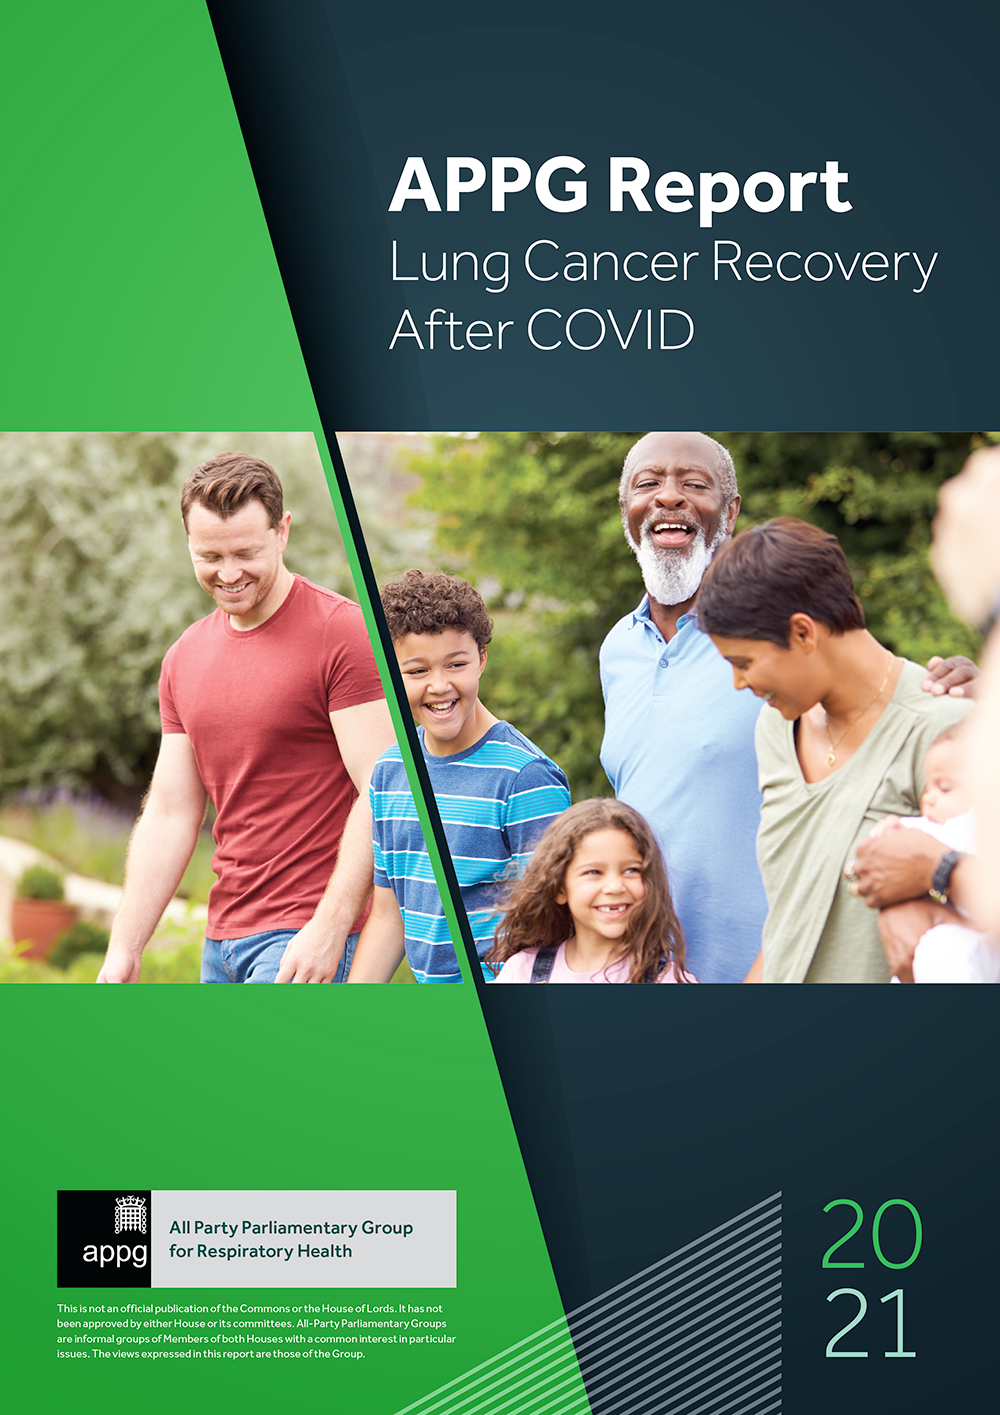 APPG Report Lung Cancer Recovery After COVID